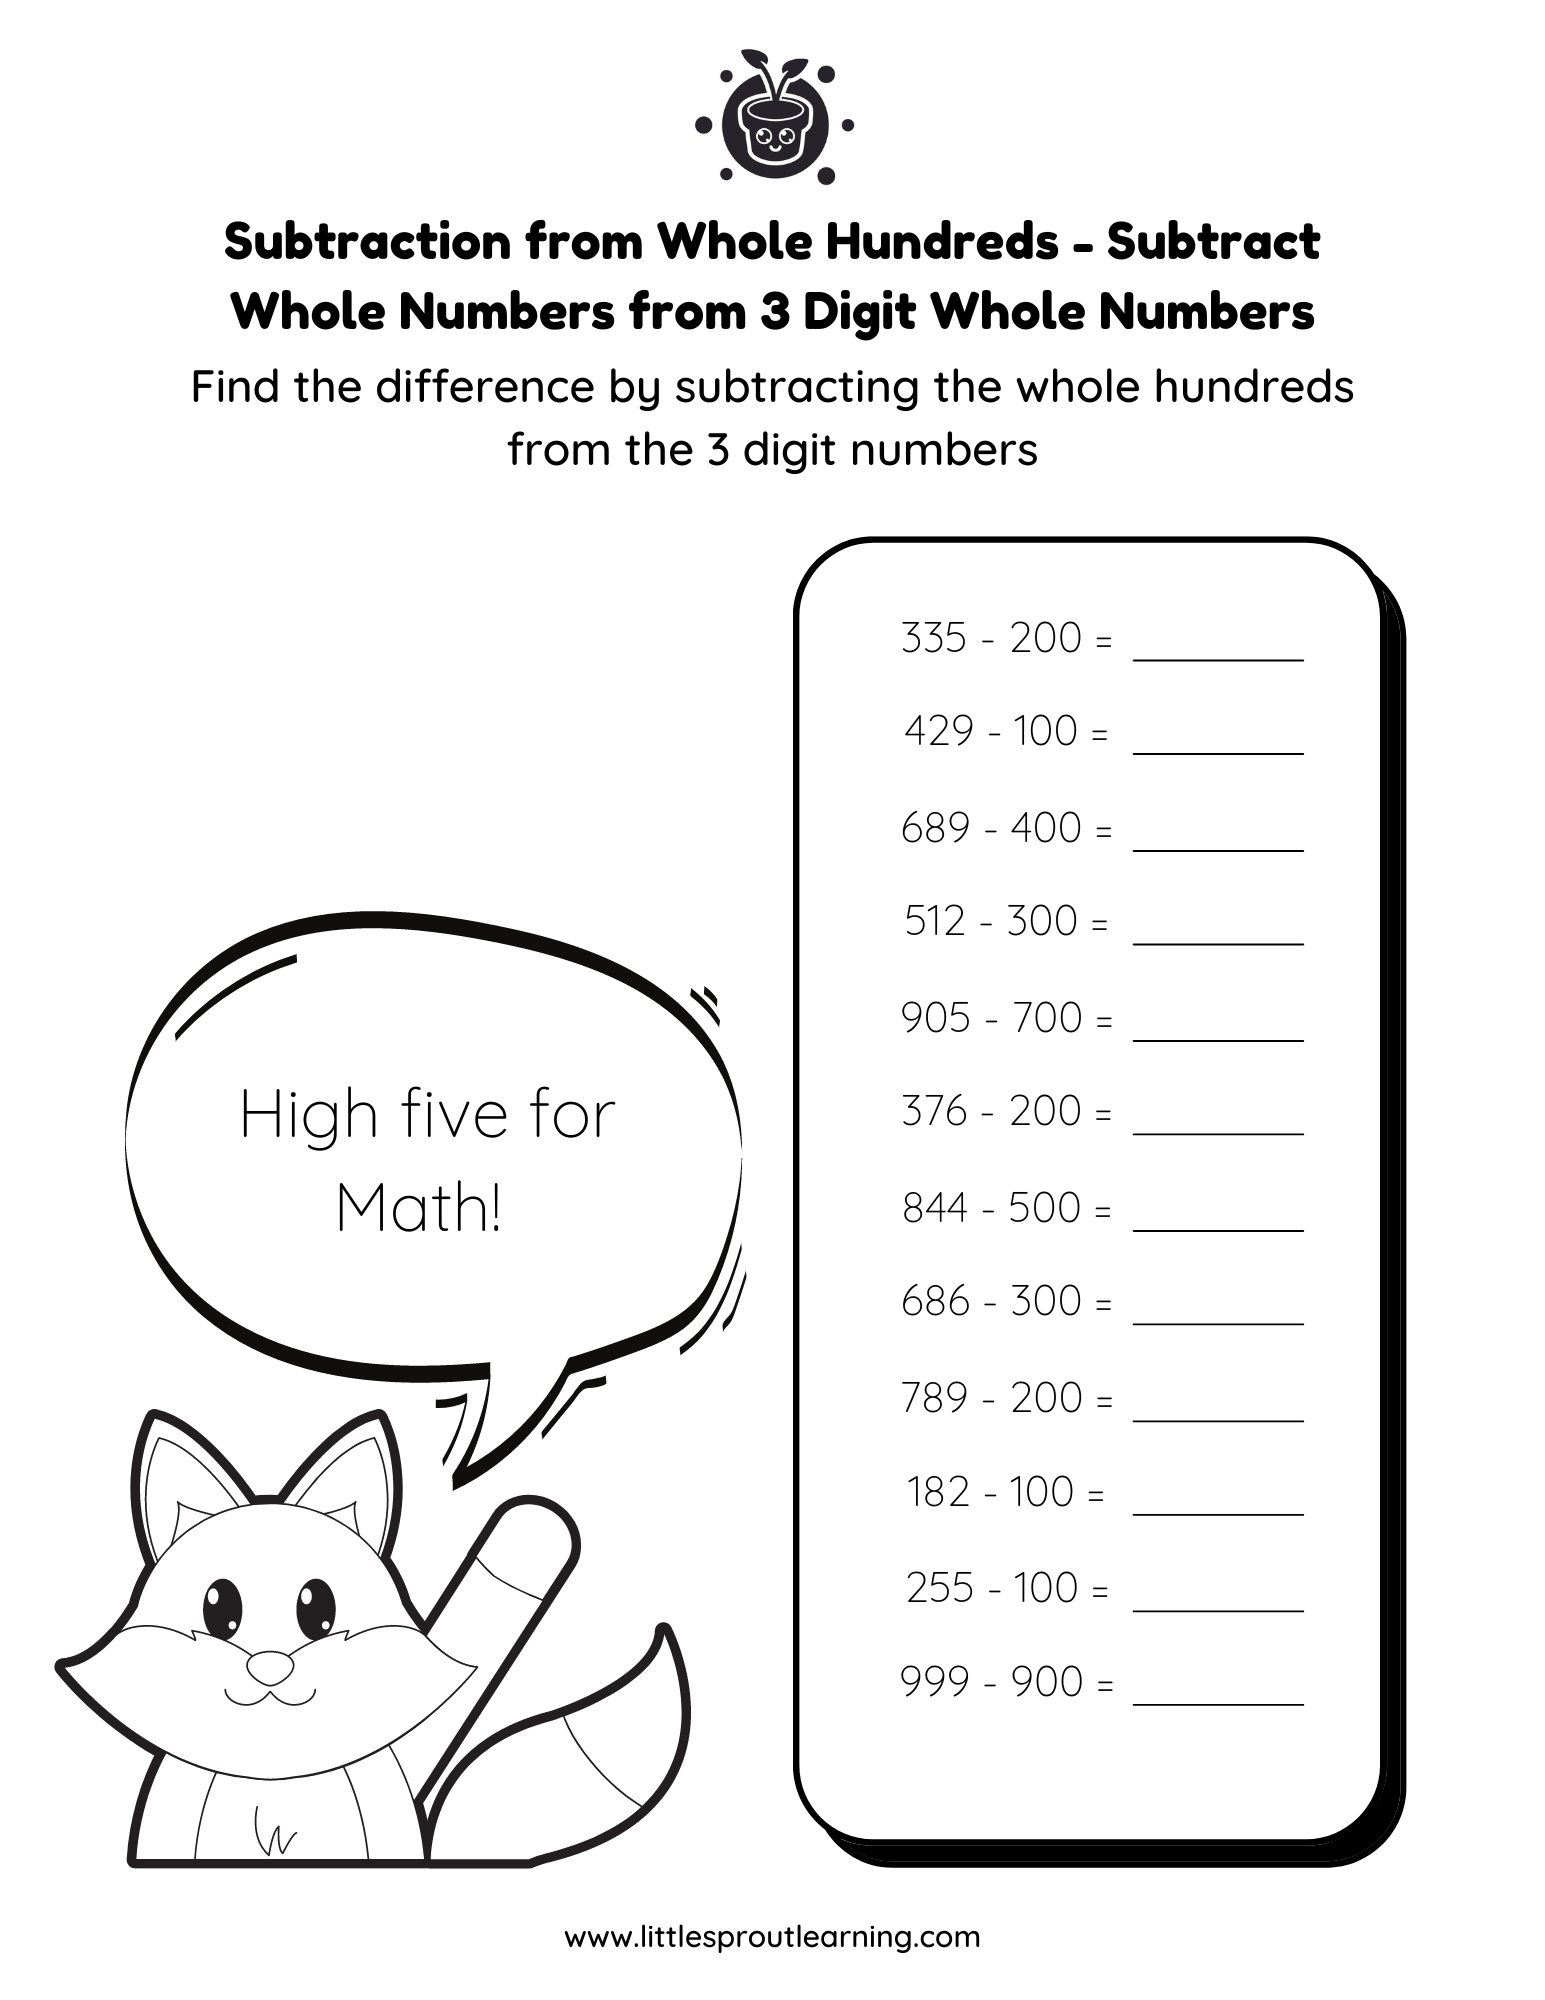 Subtraction Worksheet – Subtracting Whole Hundreds from 3 Digit Whole Numbers